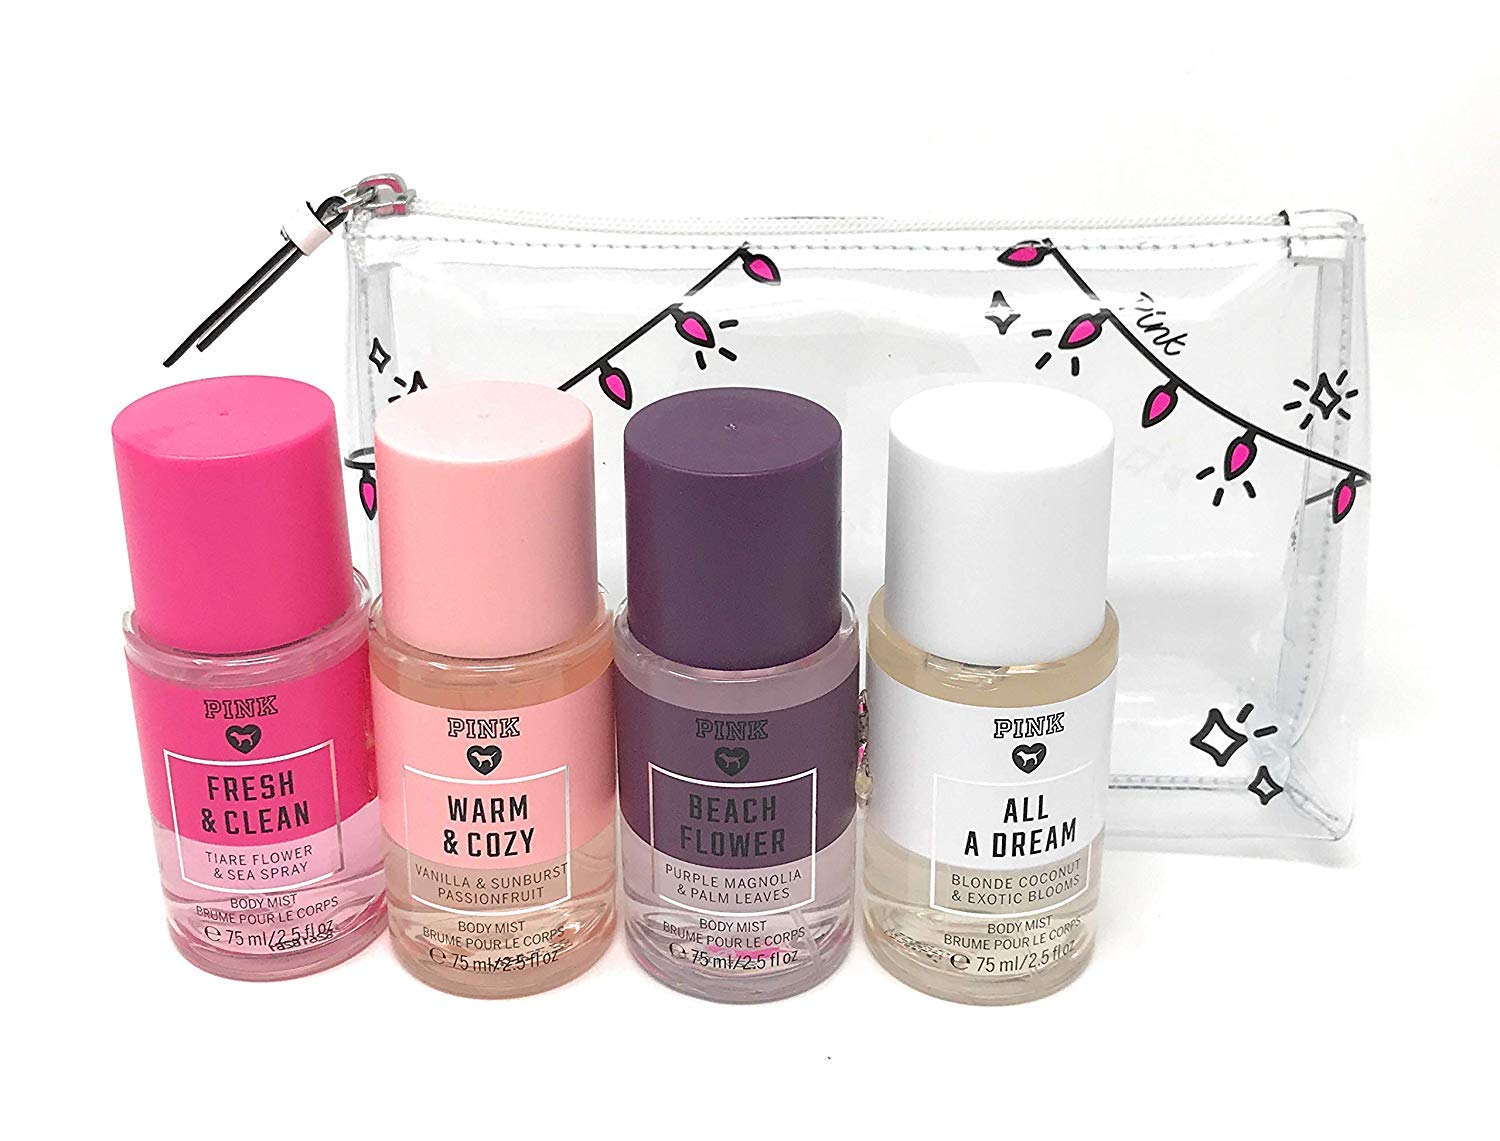 Victoria's Secret Pink Fragrance Mist Set Travel Size 4 Piece Fresh and Clean, Warm and Cozy, Beach Flower, All A Dream